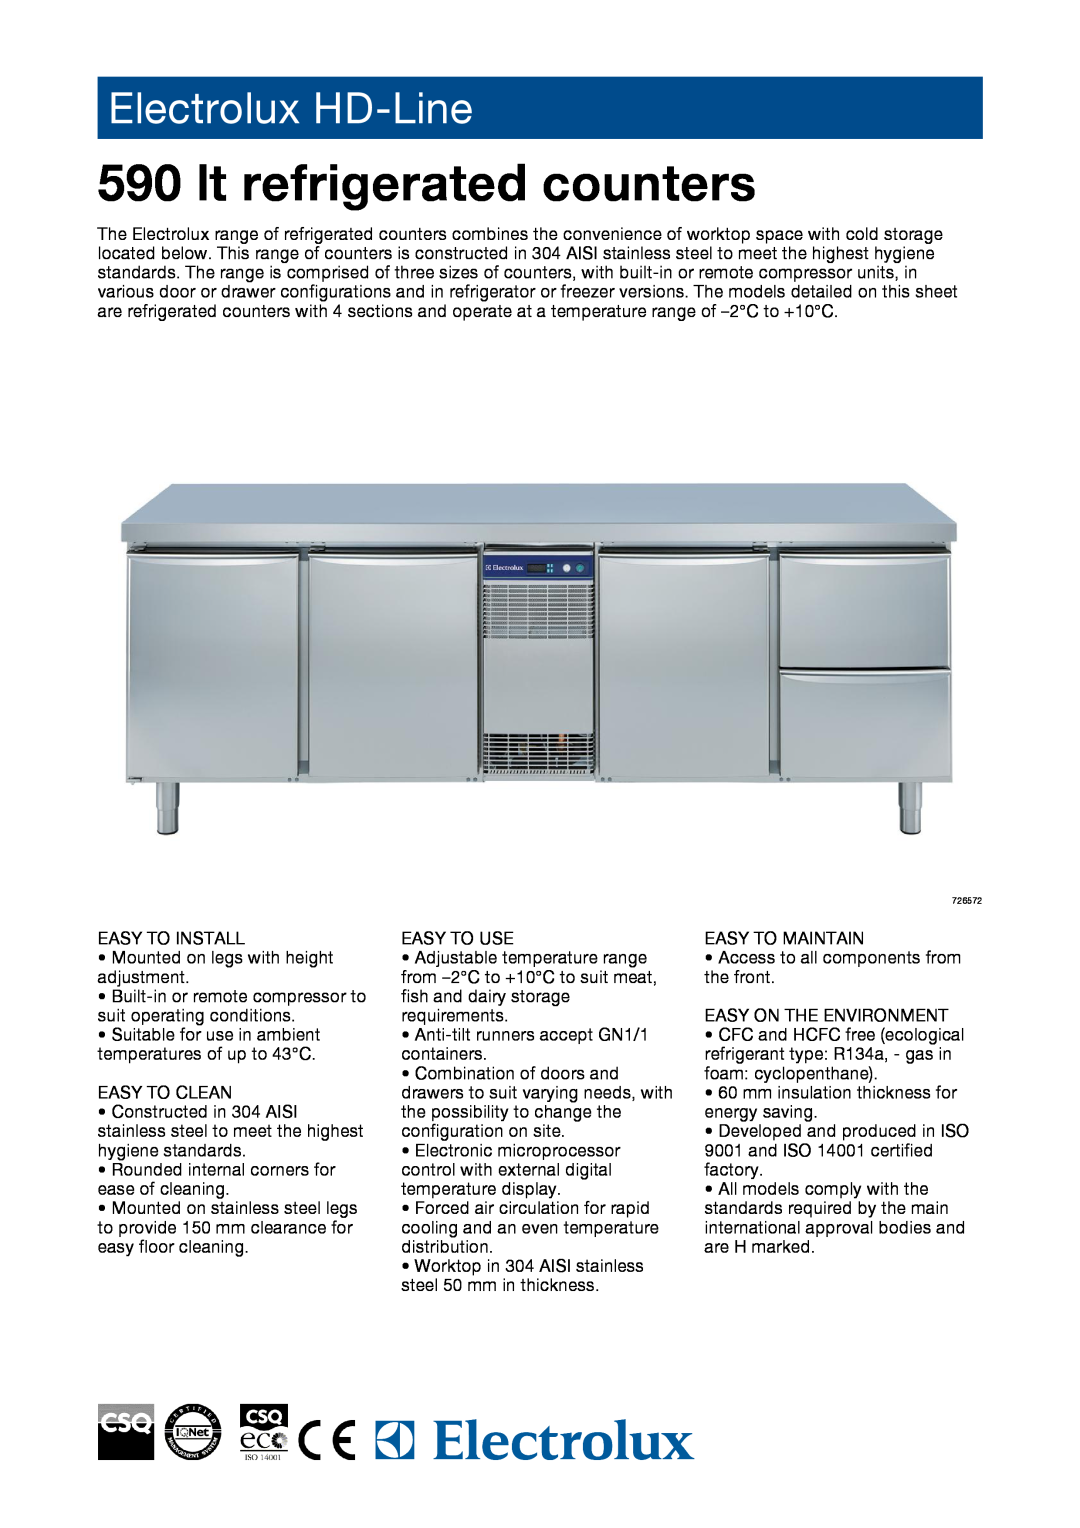 Electrolux 727083, 727085, 726571, 726572, 726575, 726576, 727082, 726199 manual lt refrigerated counters, Electrolux HD-Line 